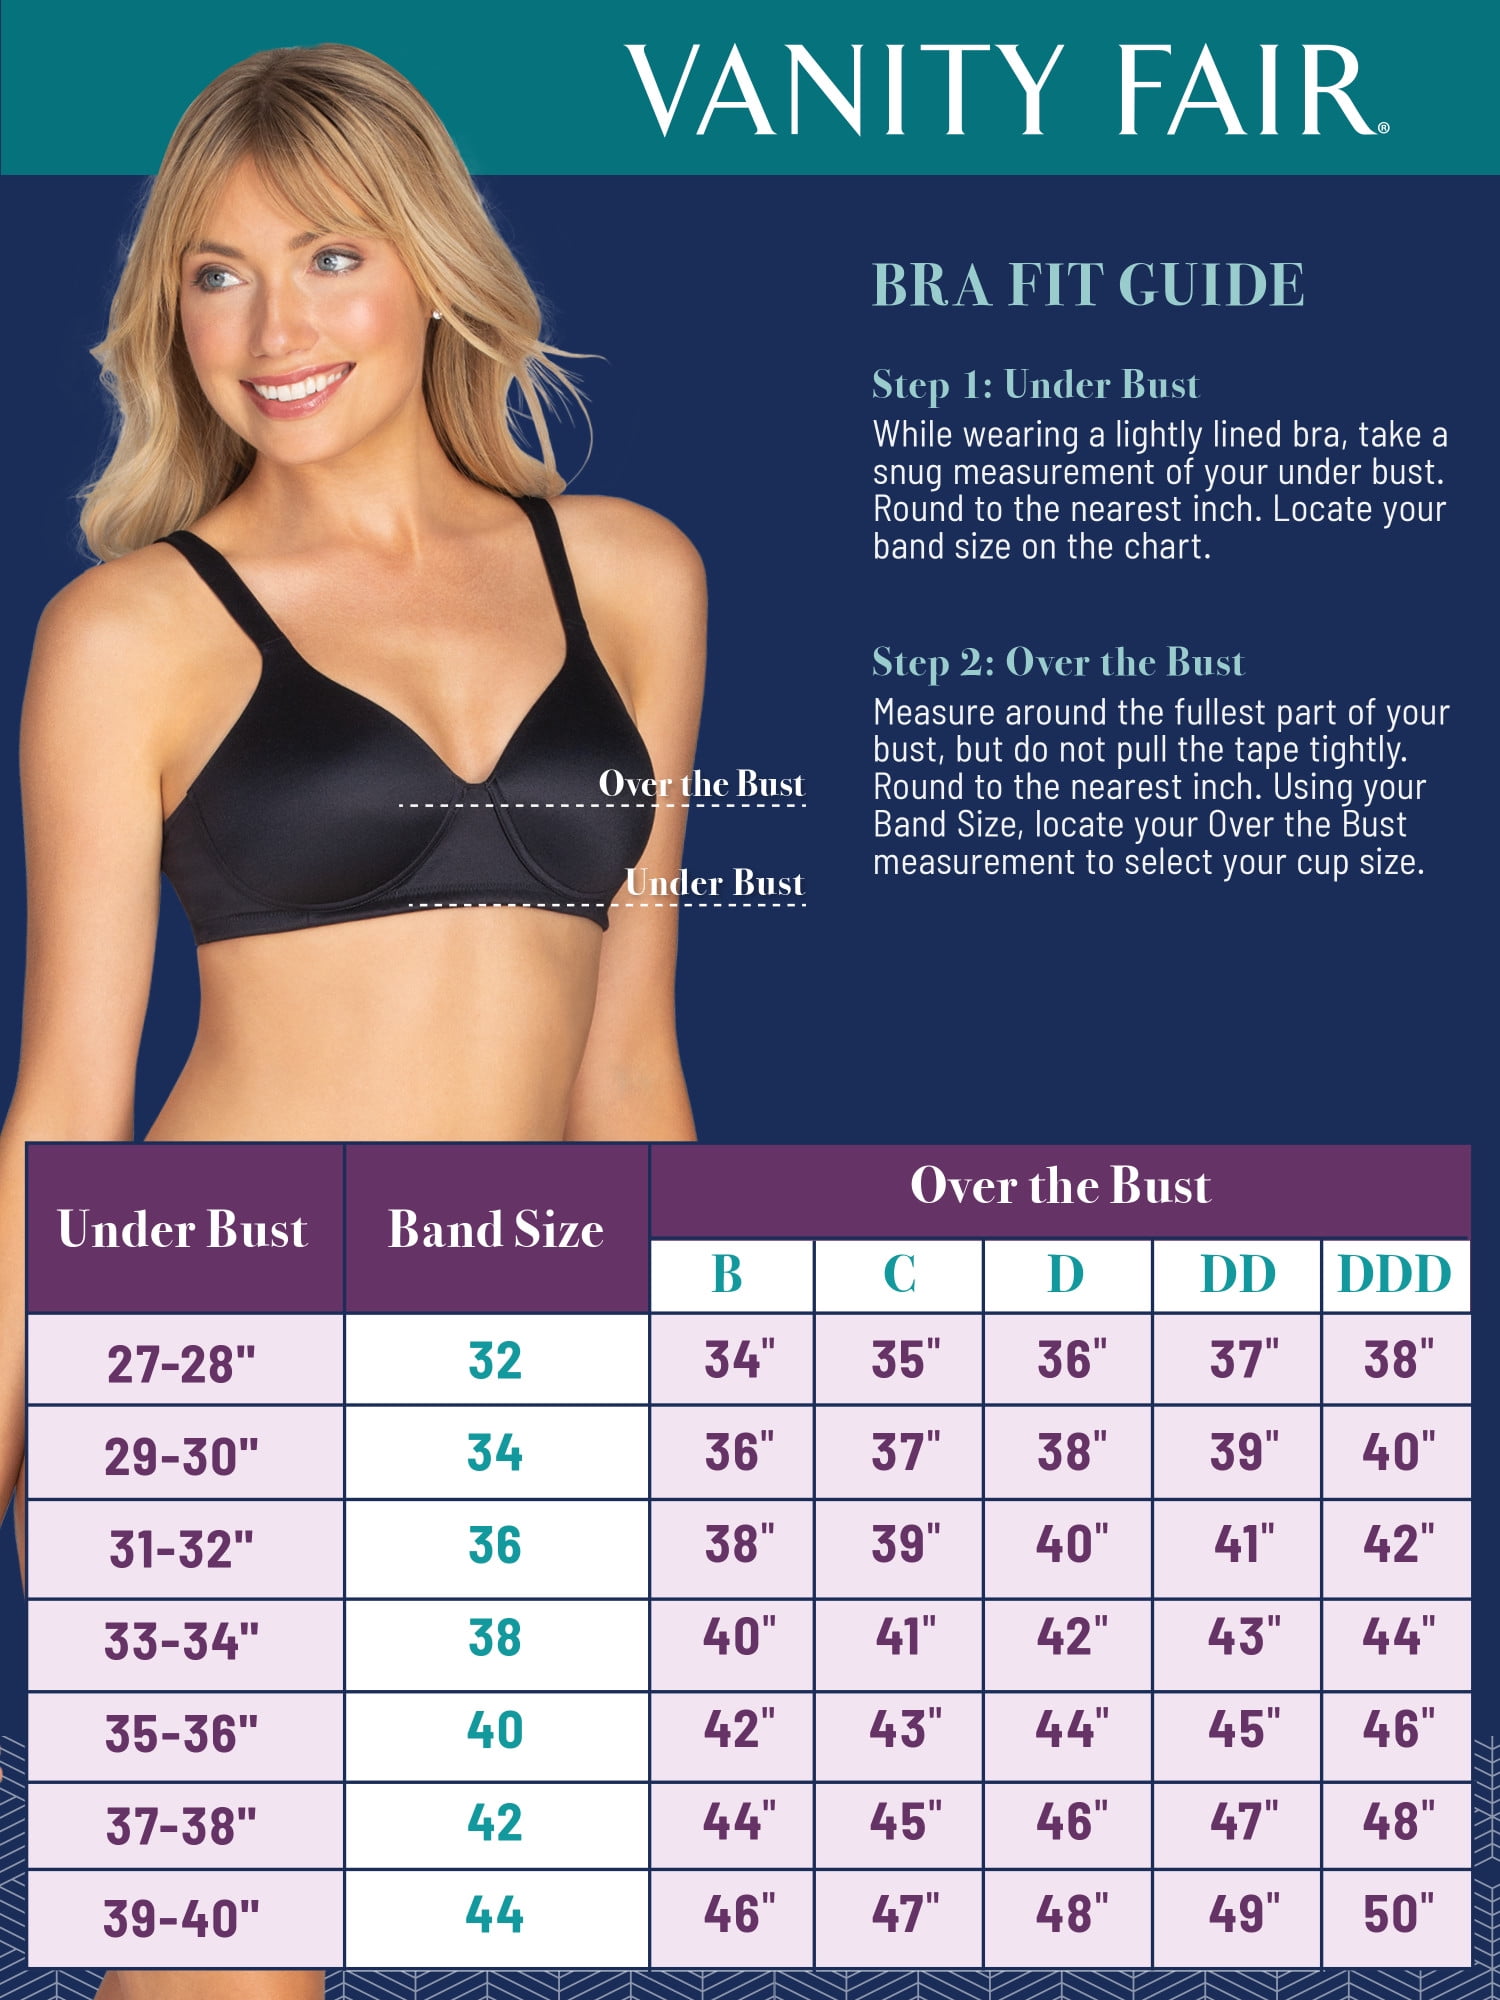 What is my bra size if my bust measures 35, and my underbust is 30